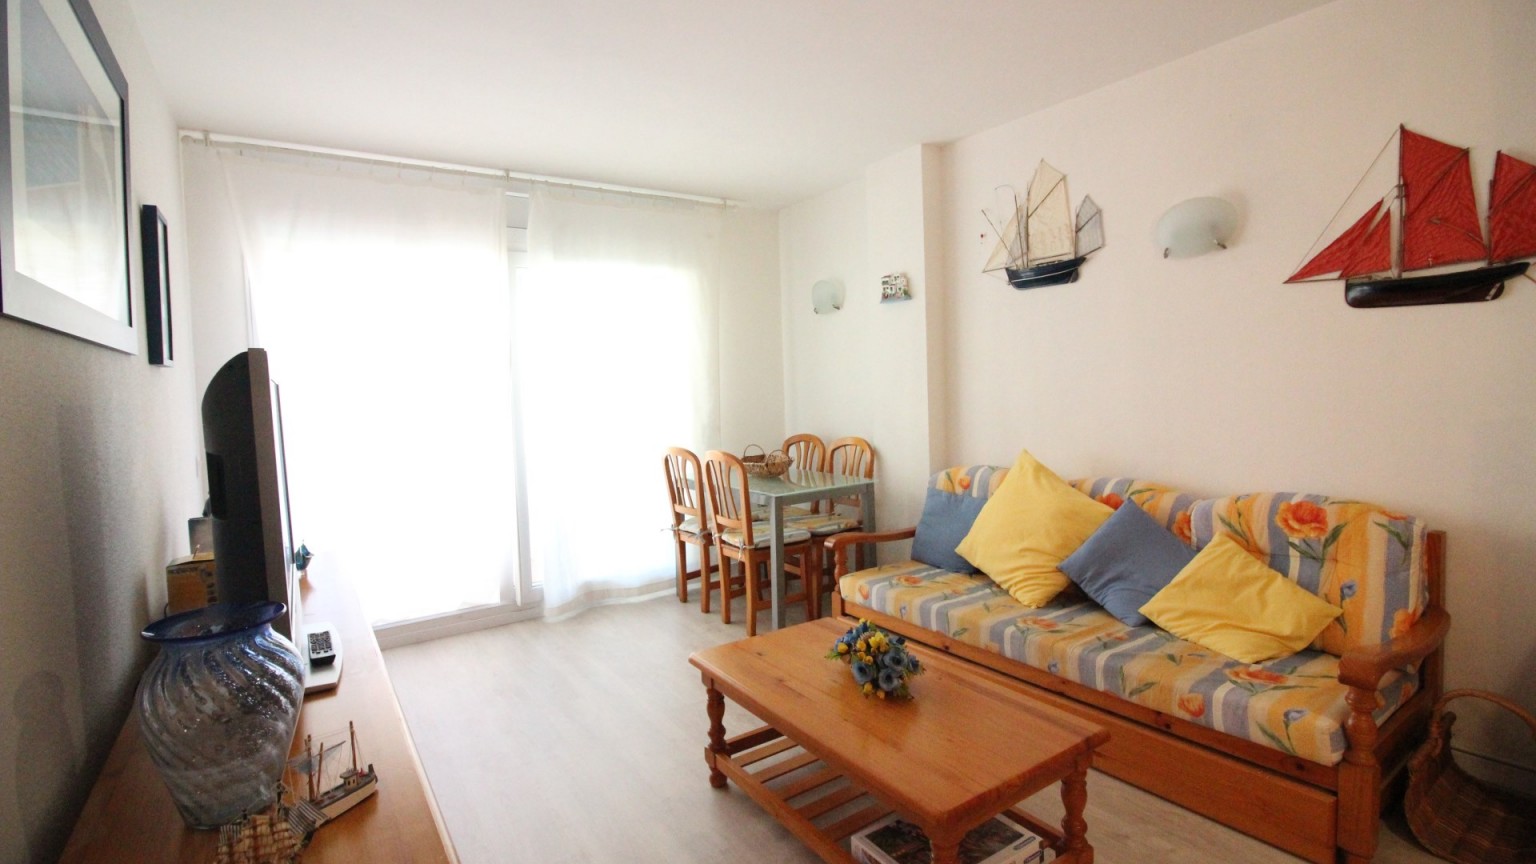 Flat for sale, residential area, with 2 bedrooms, swimming pool and communal parking.